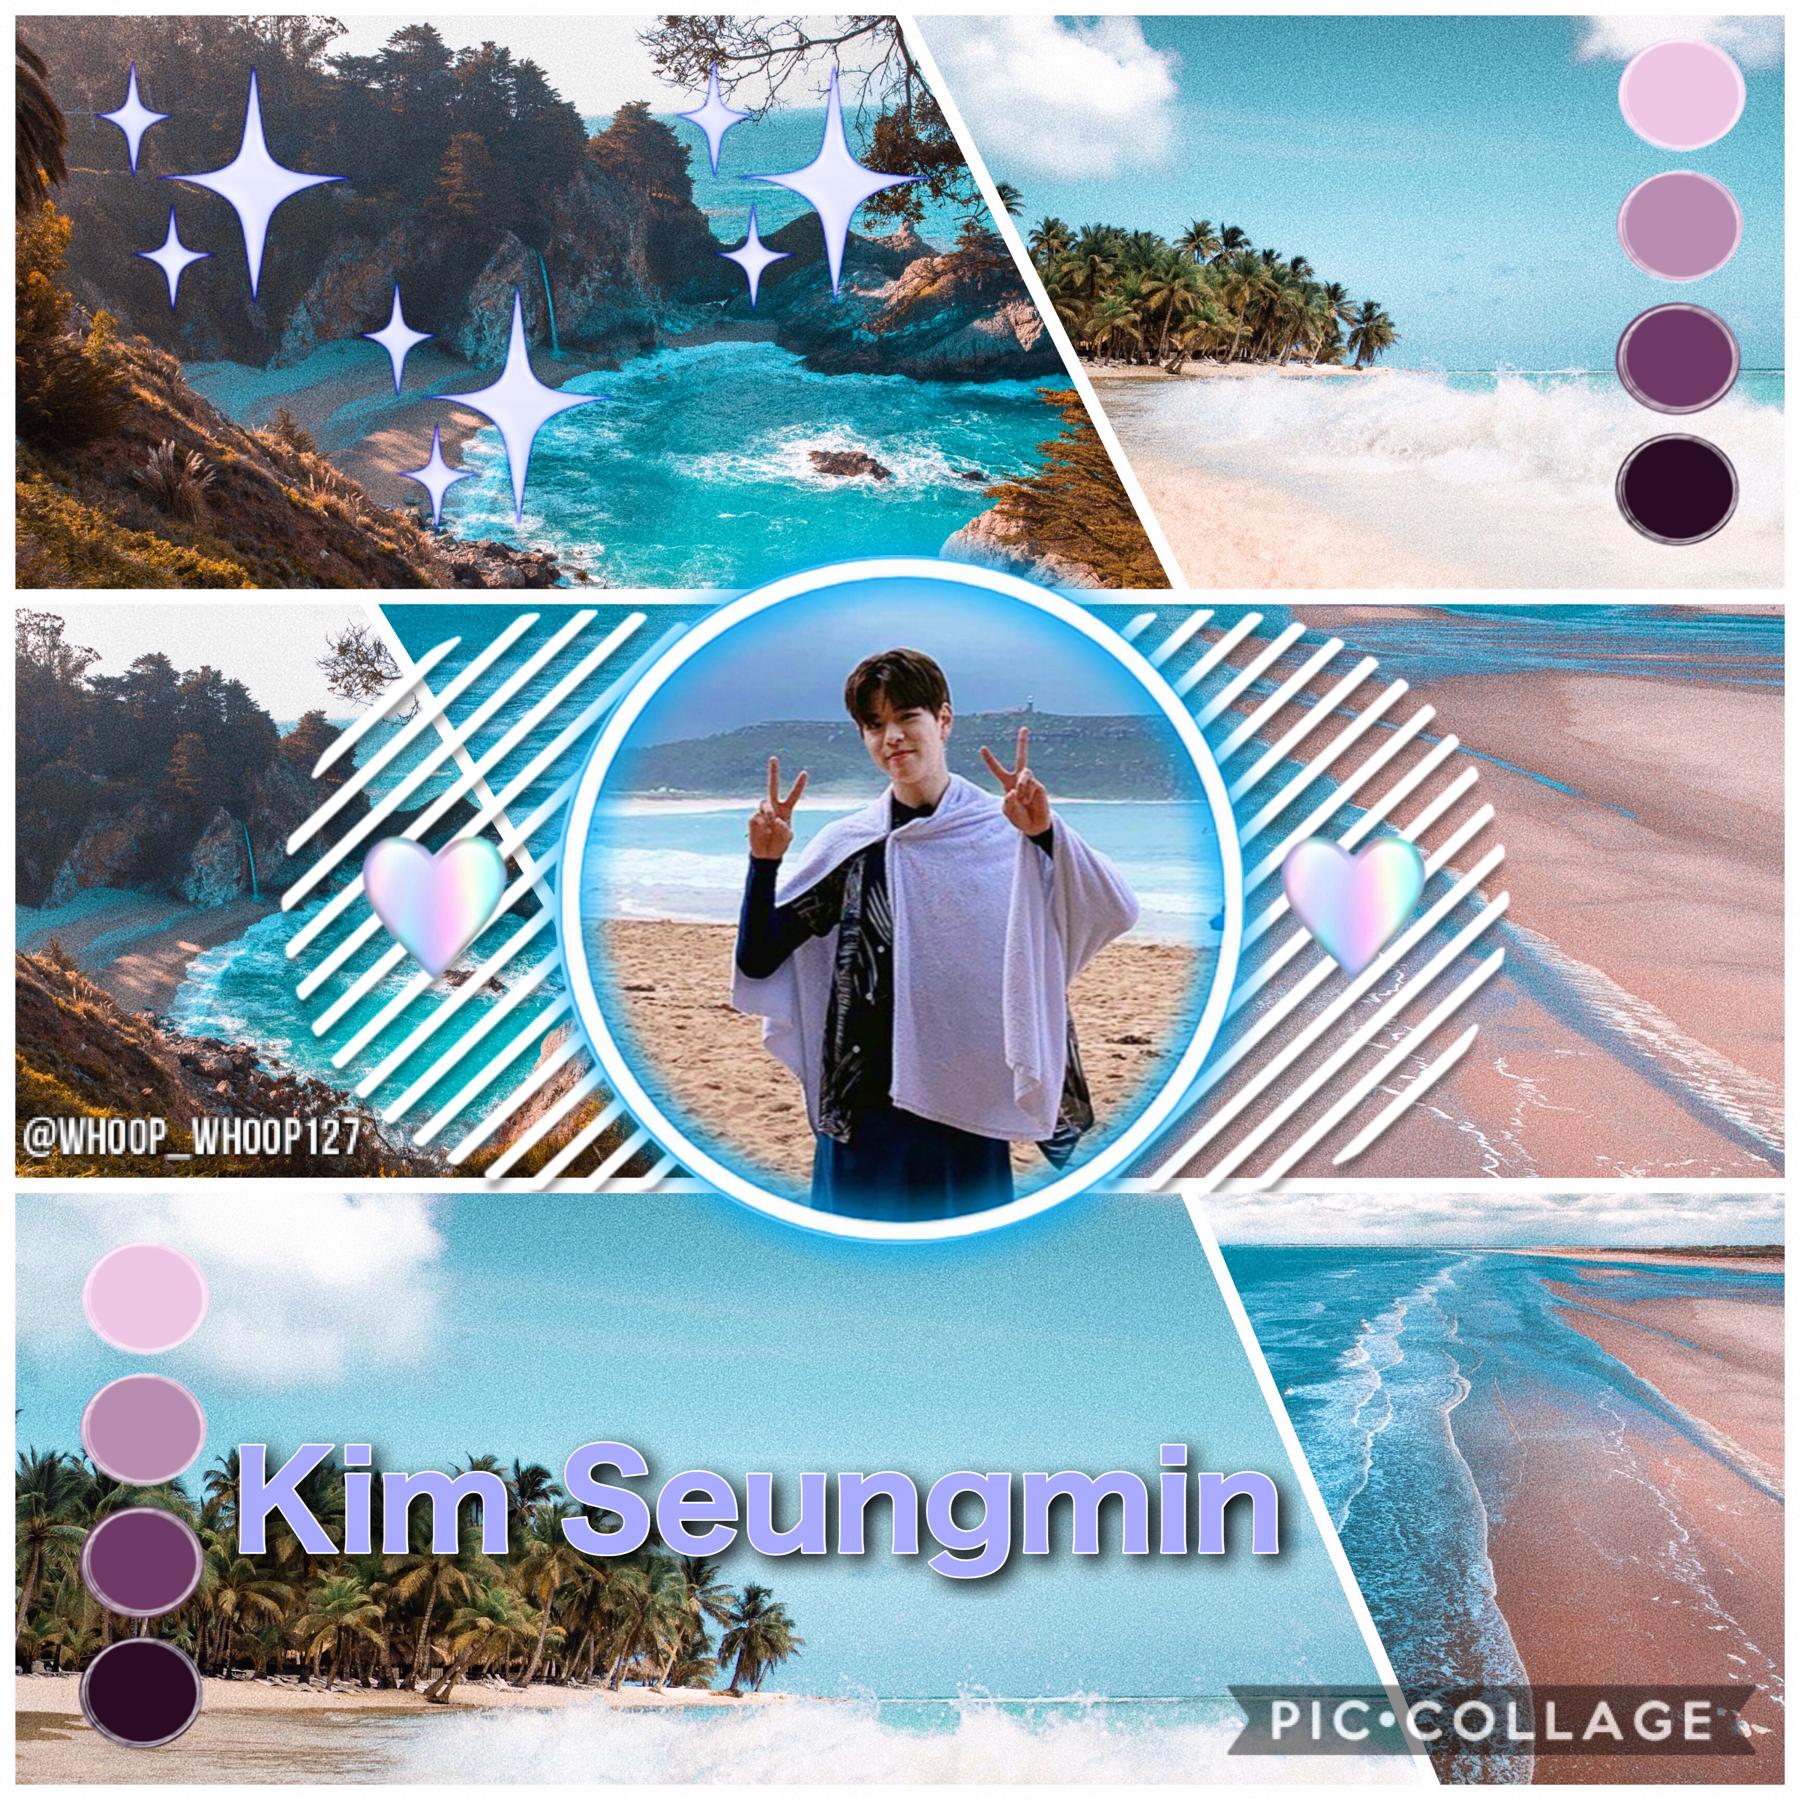 •🚒•
❄️Seungmin~Stray Kids❄️
I really want to go to a beach but here I am stuck in snow😂😭 Have any of you guys seen the animes Haikyu or Free?